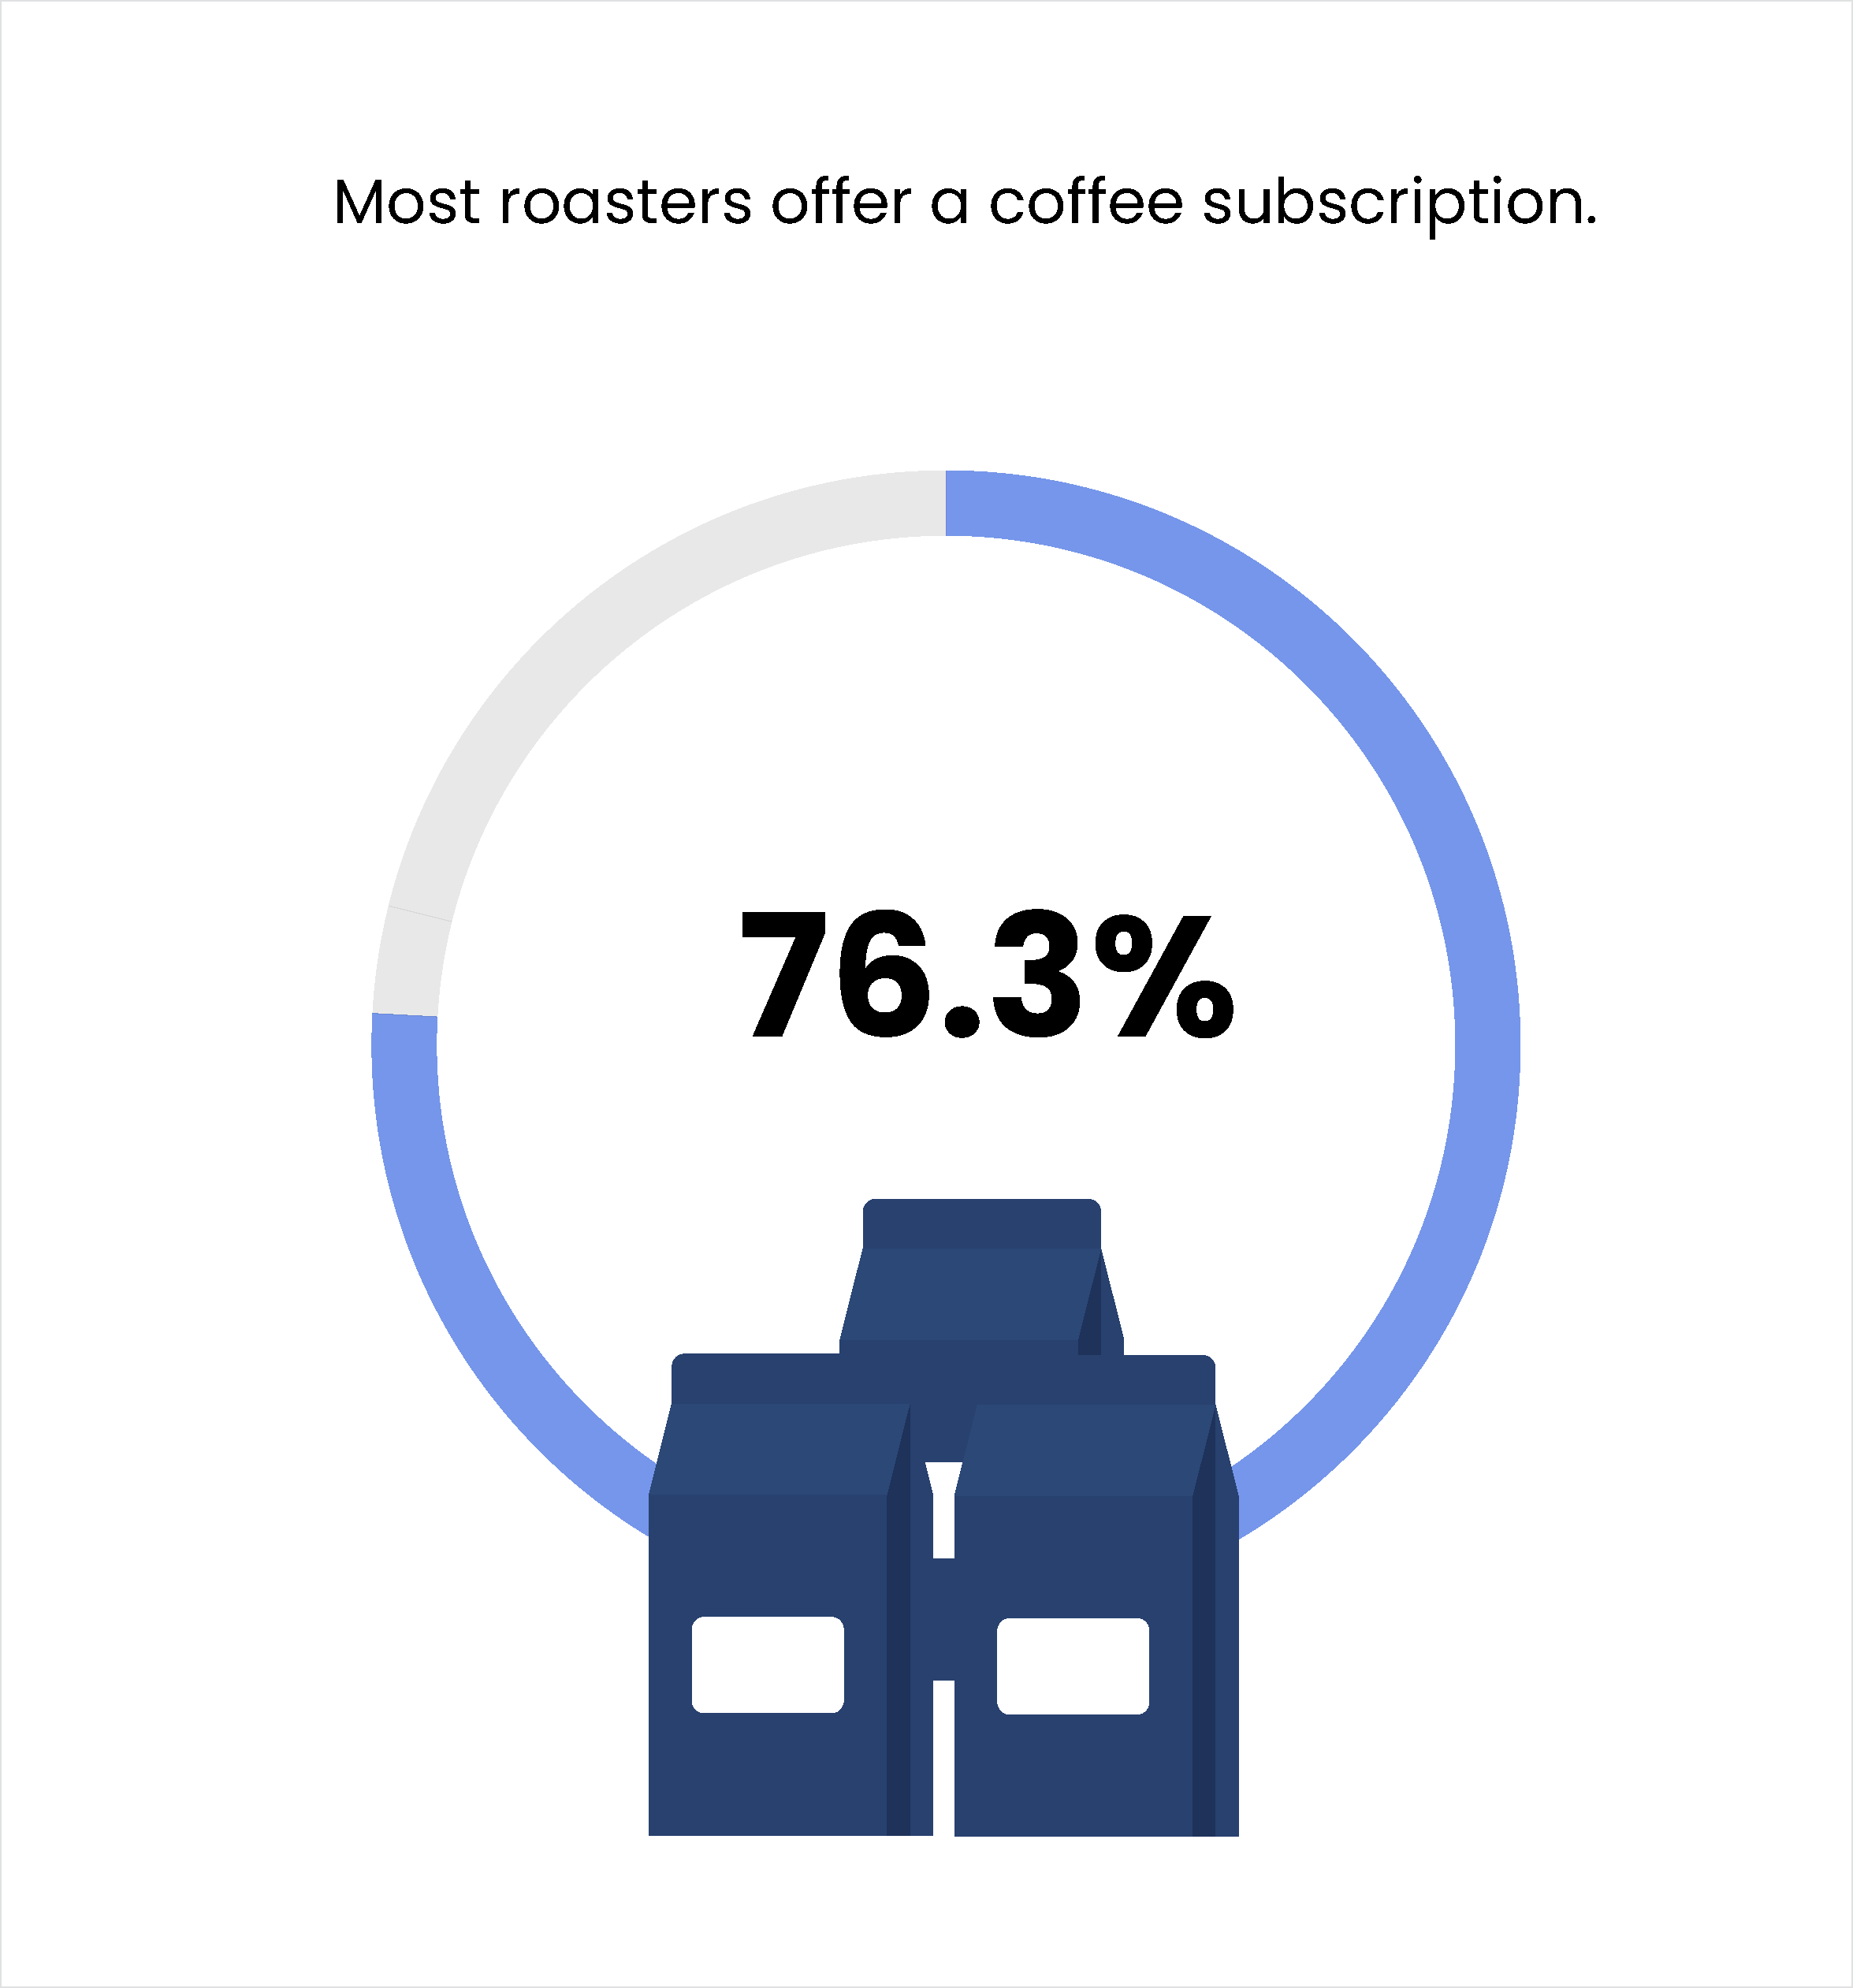 Most roasters offer a coffee subscription